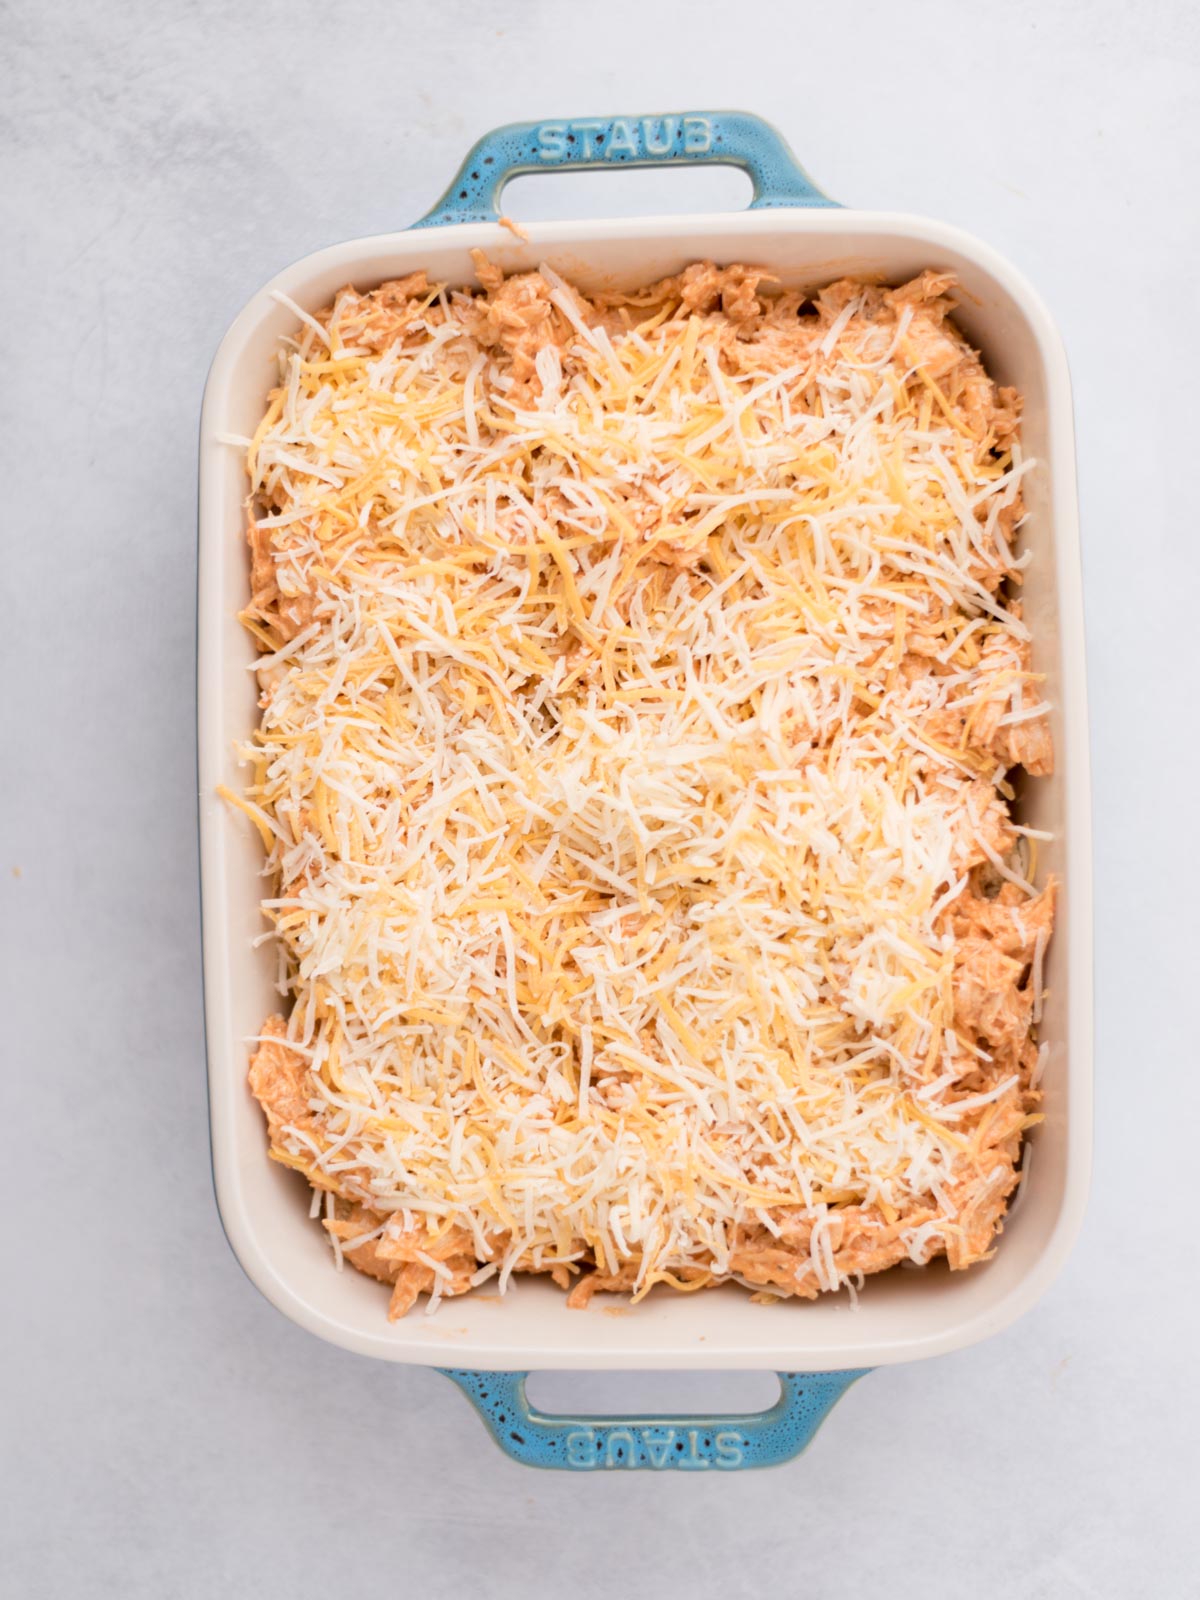 Shredded cheese topping the buffalo chicken sliders in a baking dish.